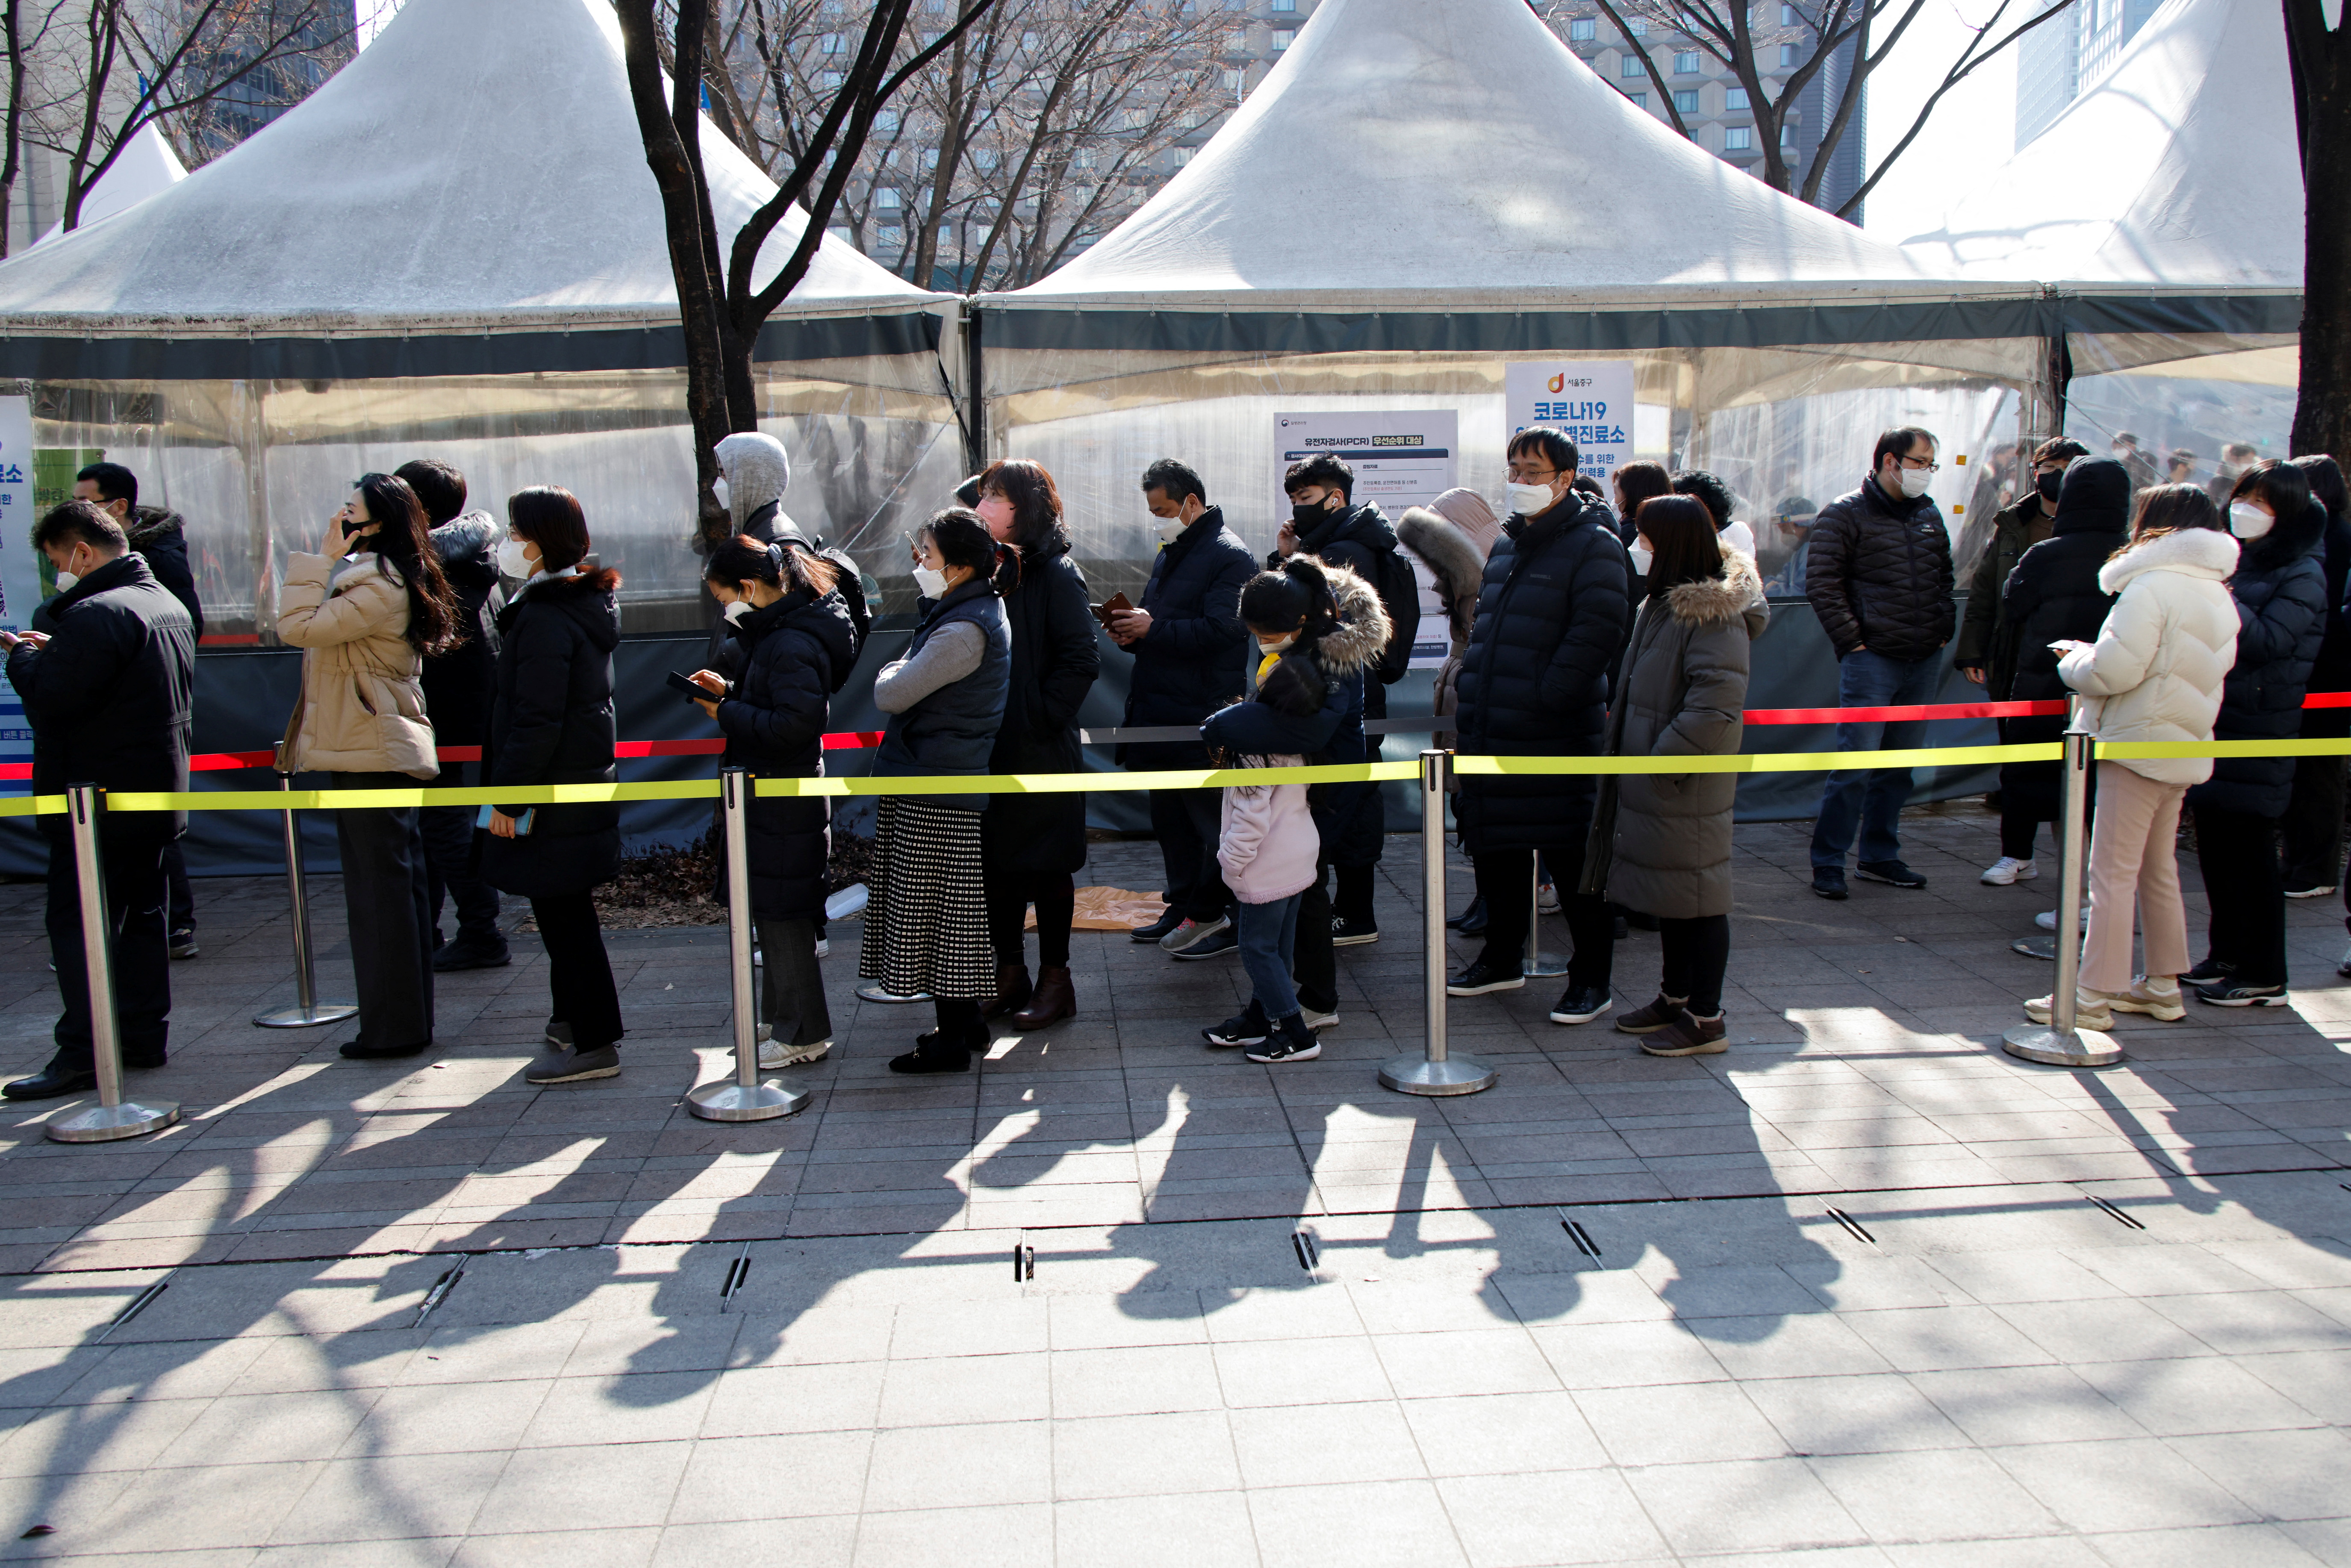 People wait in line to undergo the COVID-19 test in Seoul